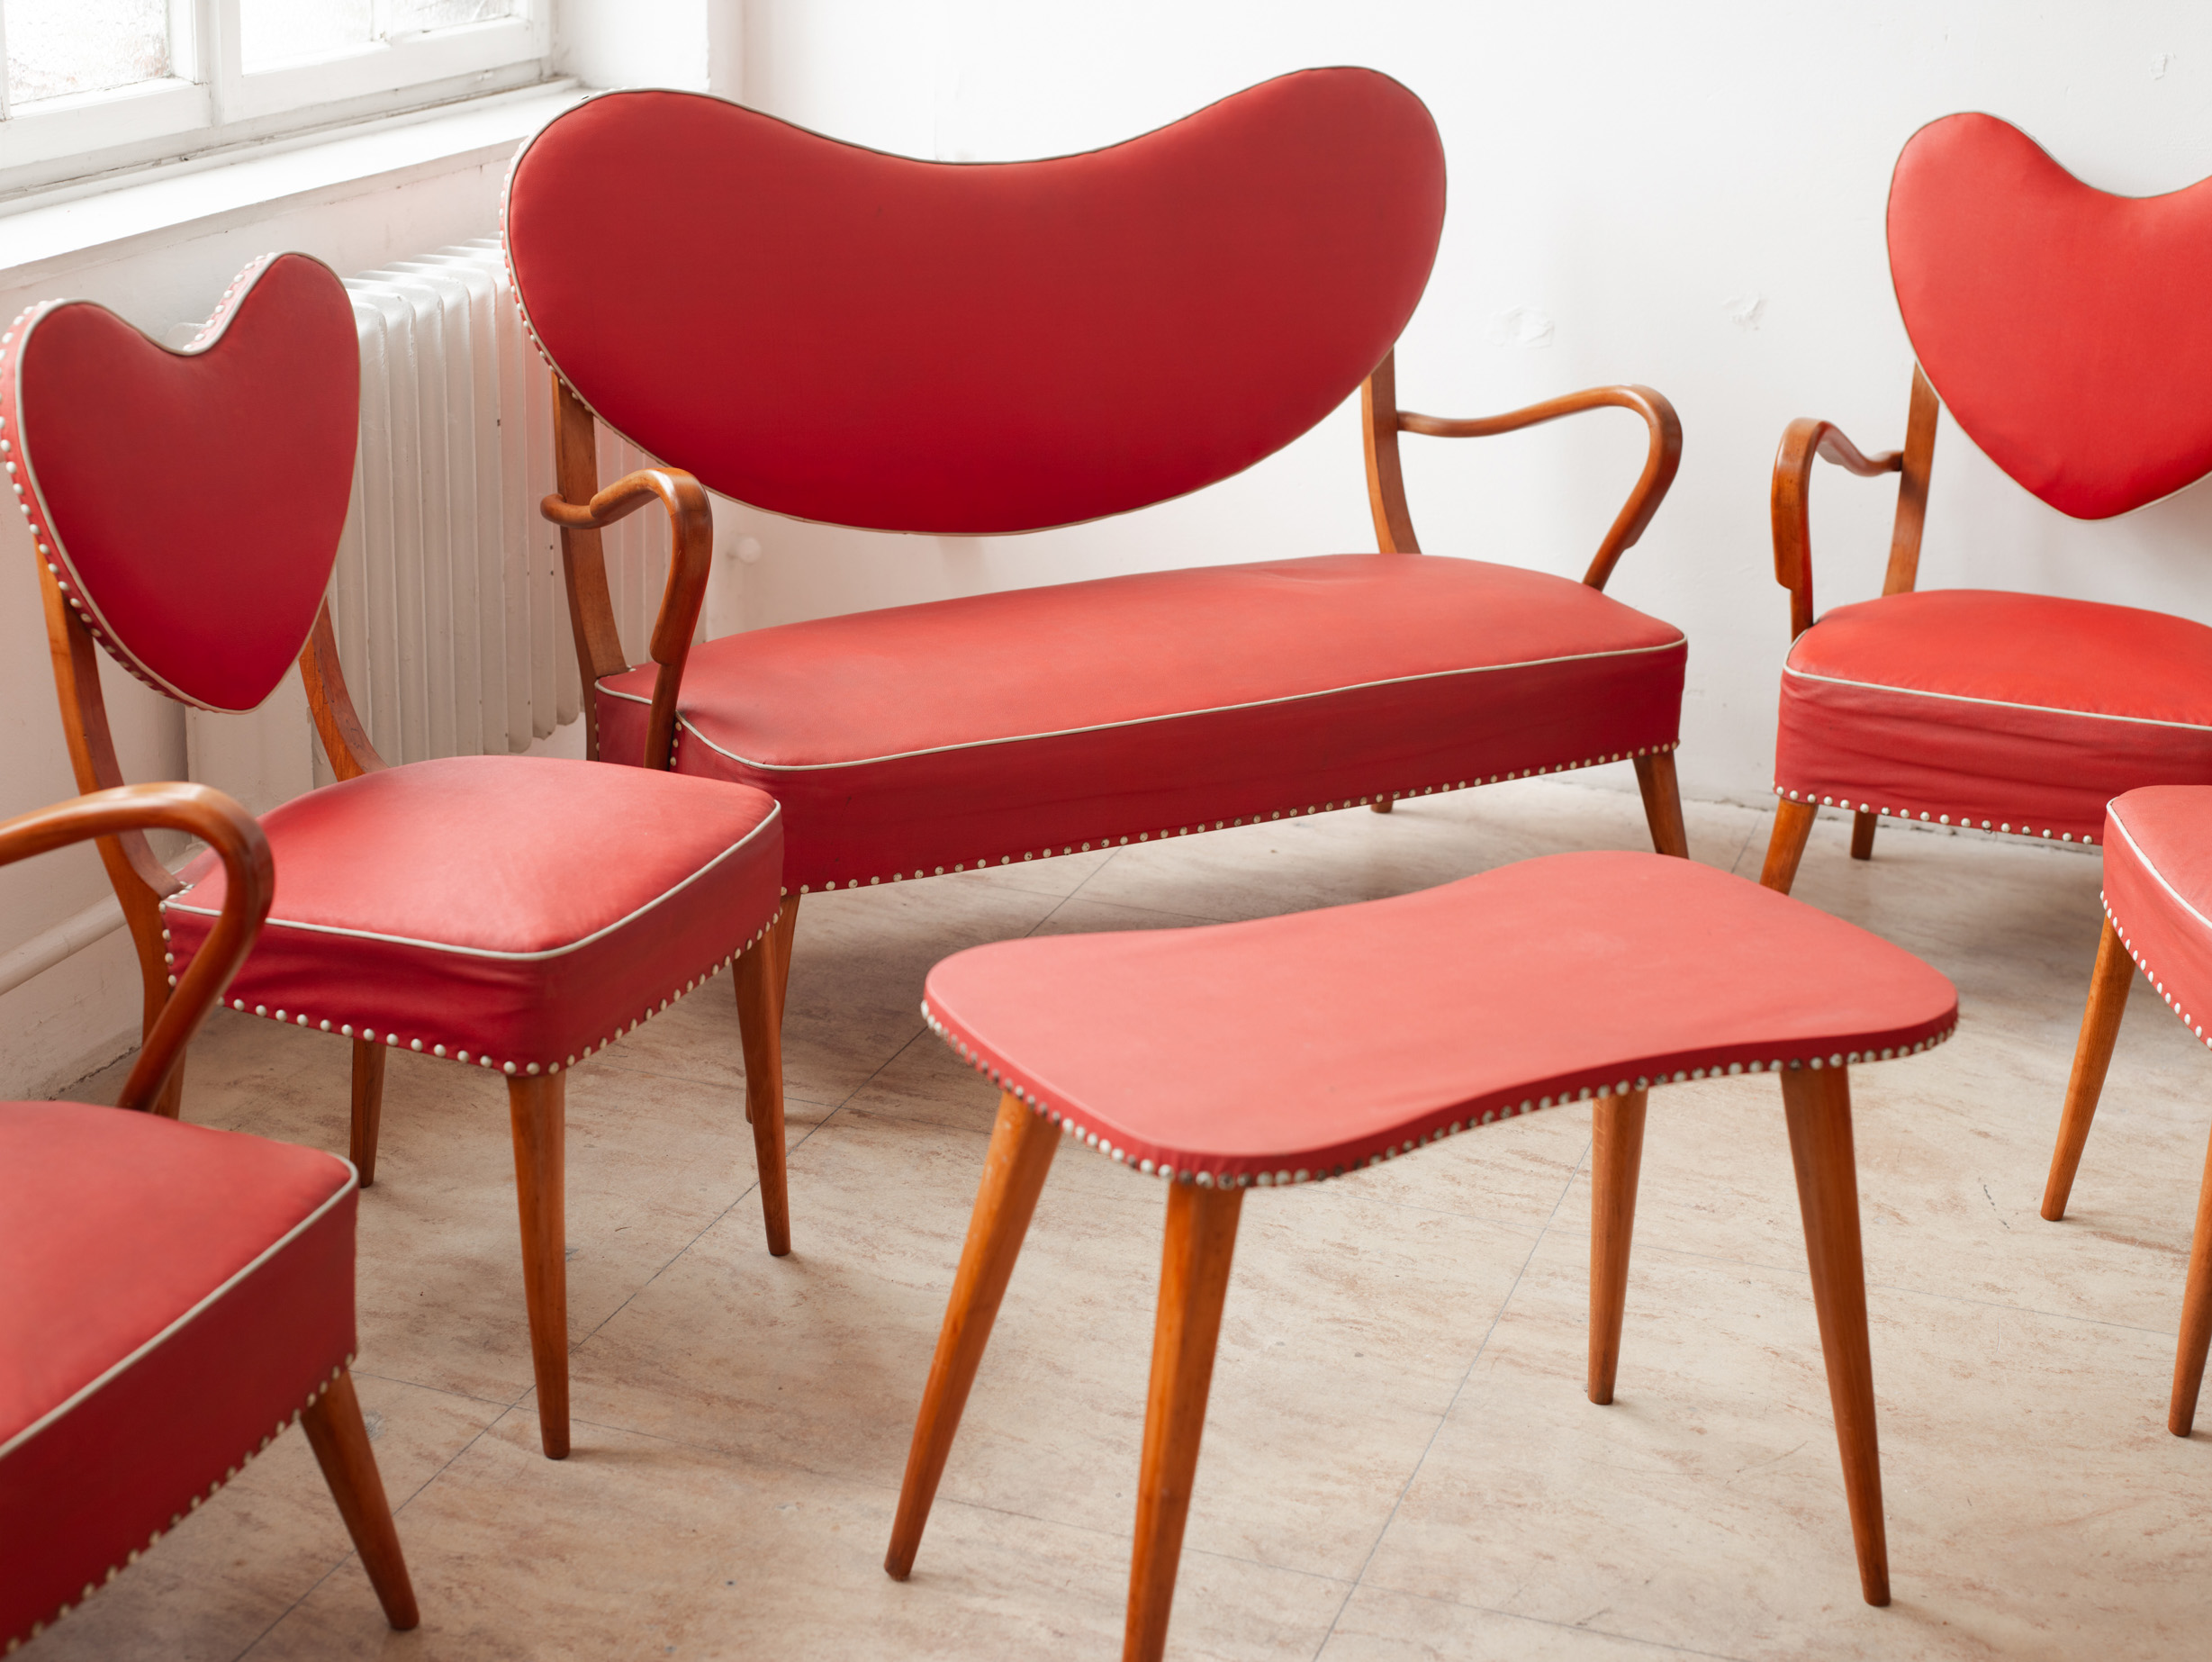 Salon seating group from an etablissement from the 1940s/50s - Image 3 of 3